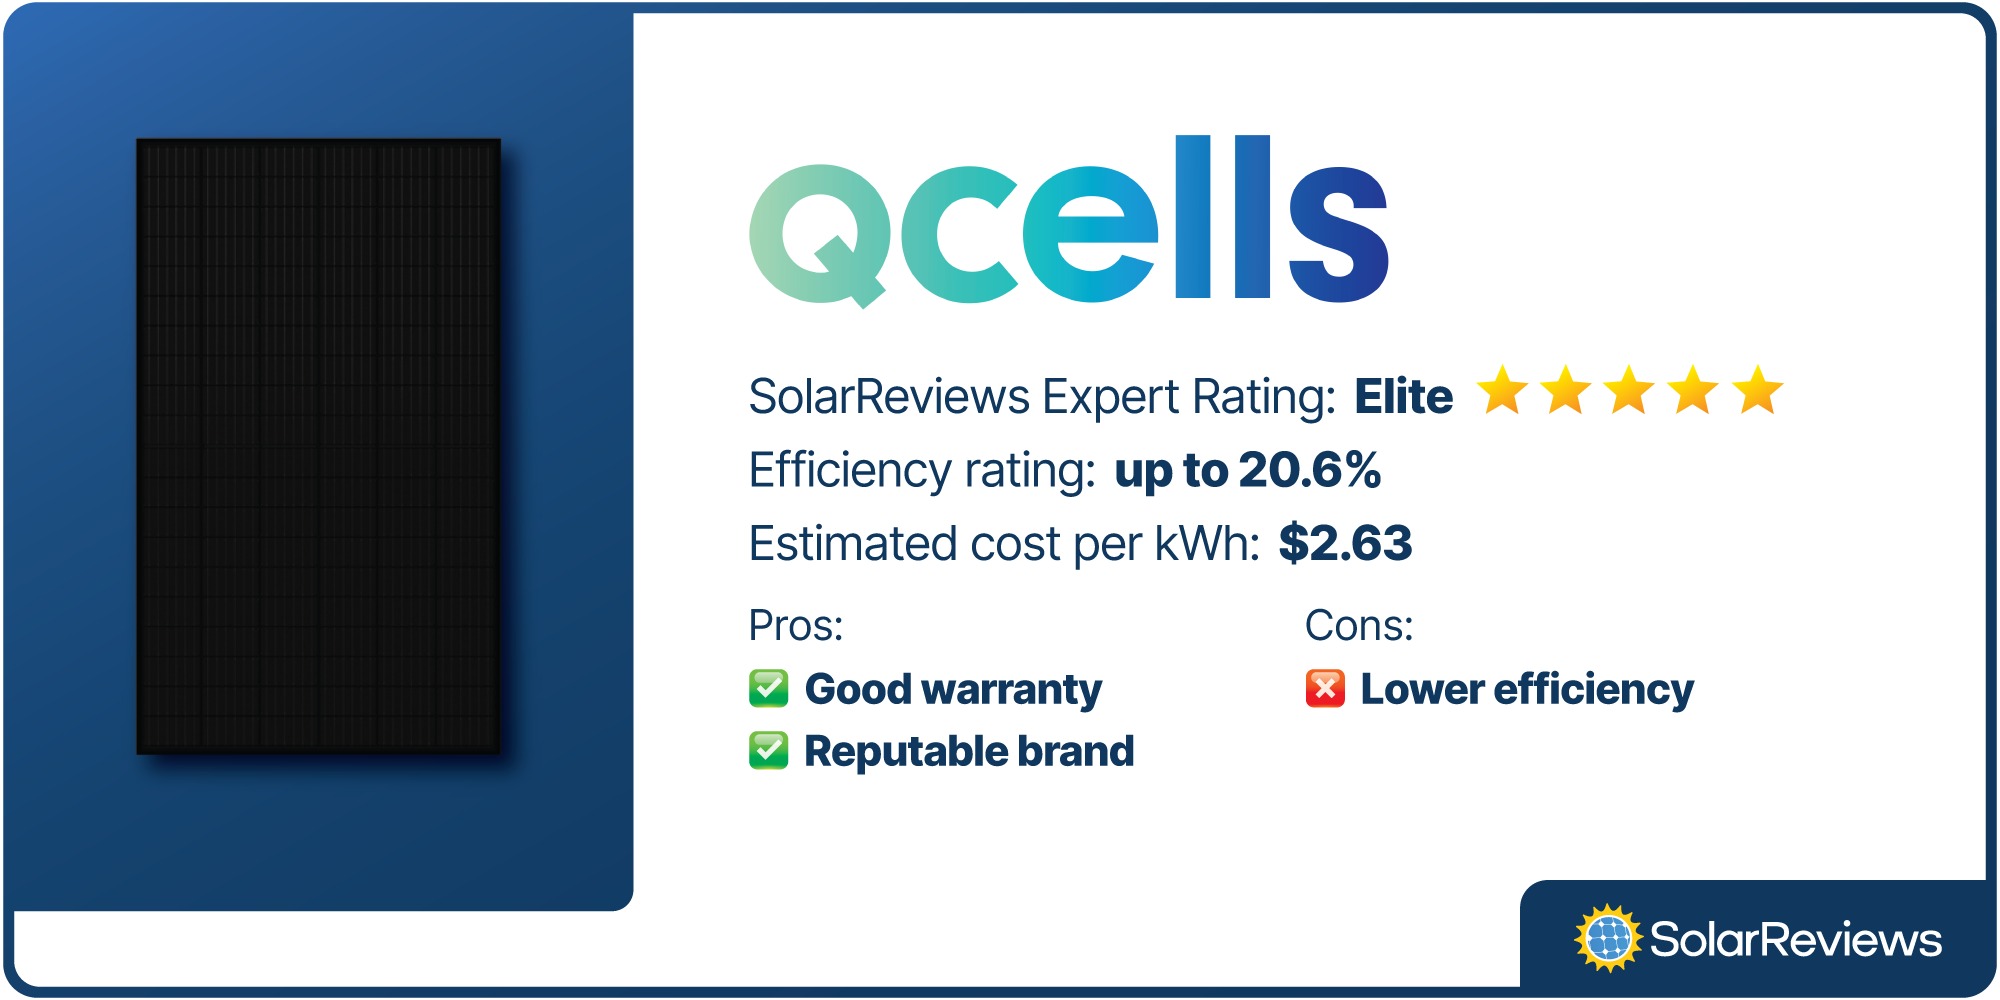 Number five on our list for cheap solar panels is Q Cells. This panel has an Elite rating from our SolarReviews' experts and an efficiency rating up to 20.6%. The estimated cost for this panel is $2.63 per kWh.